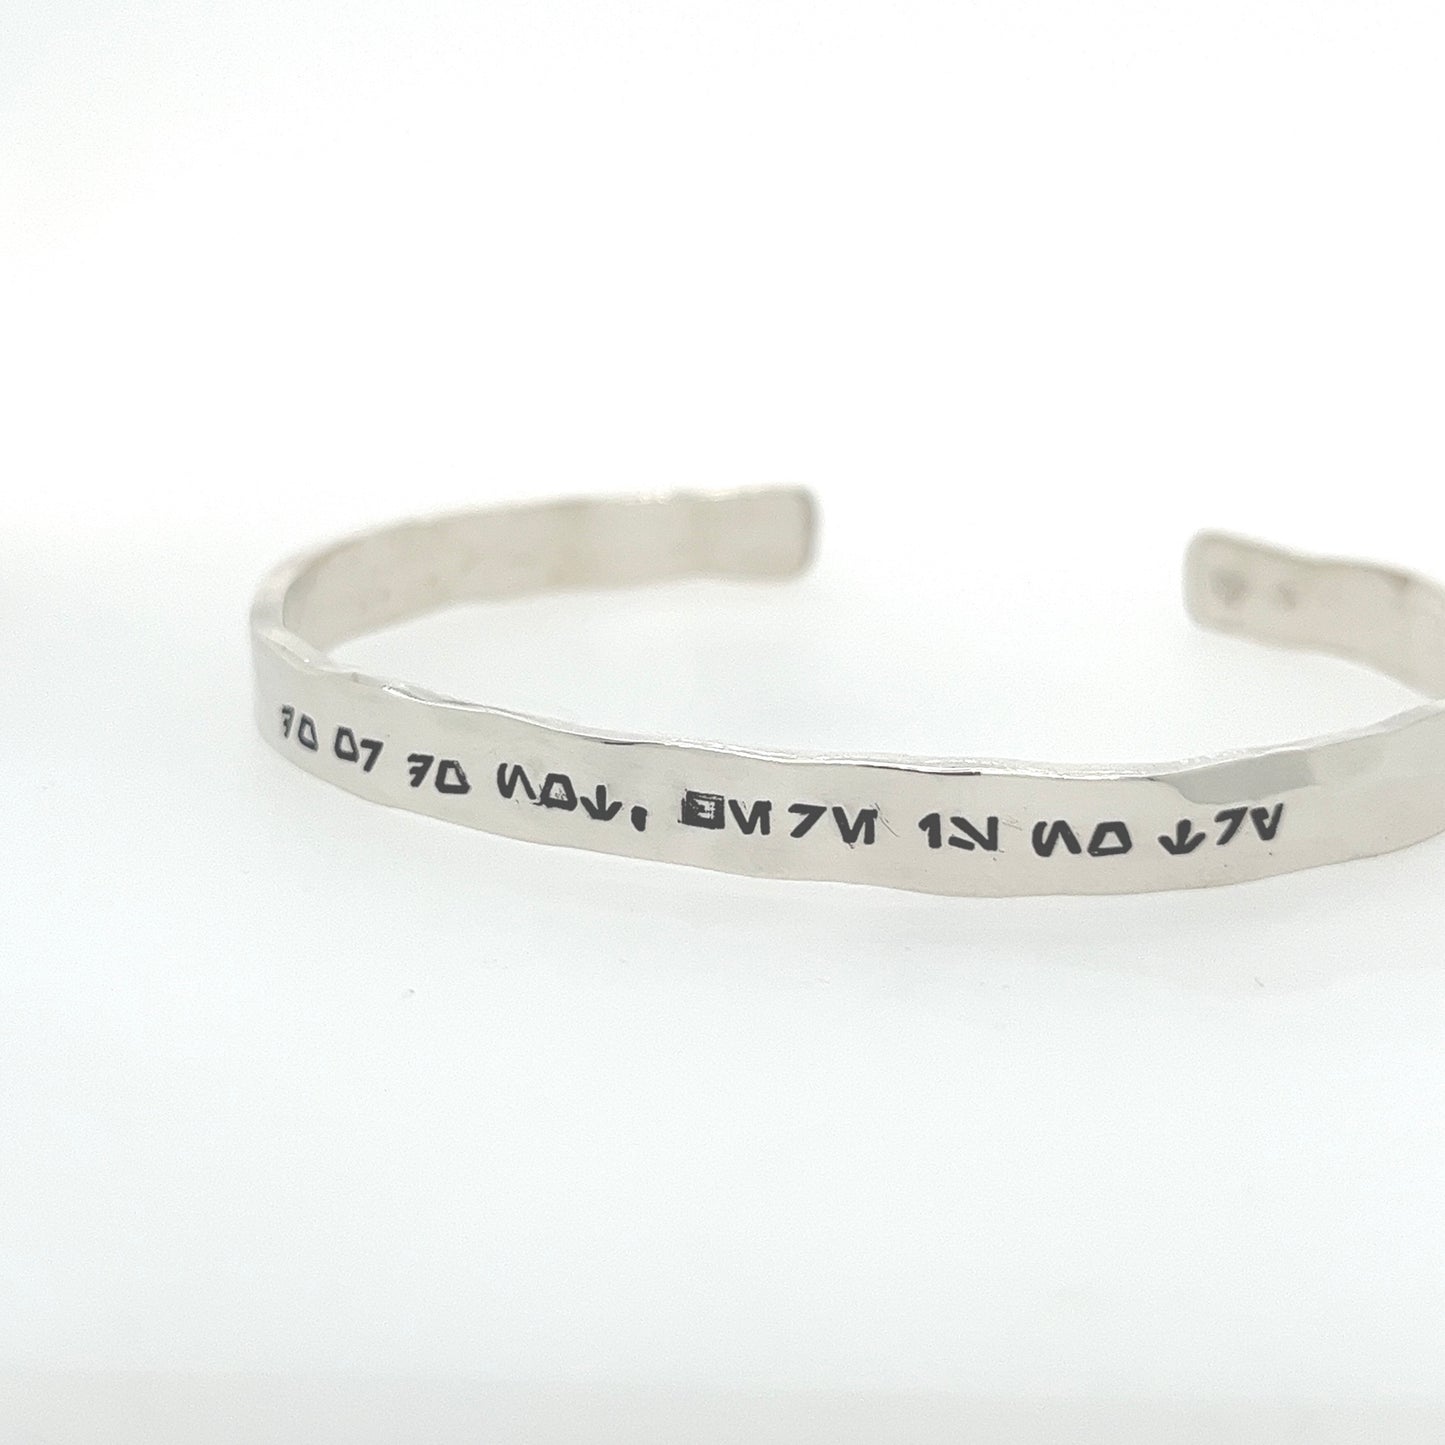 Aurebesh Bangle: “Do or do not, there is no try”